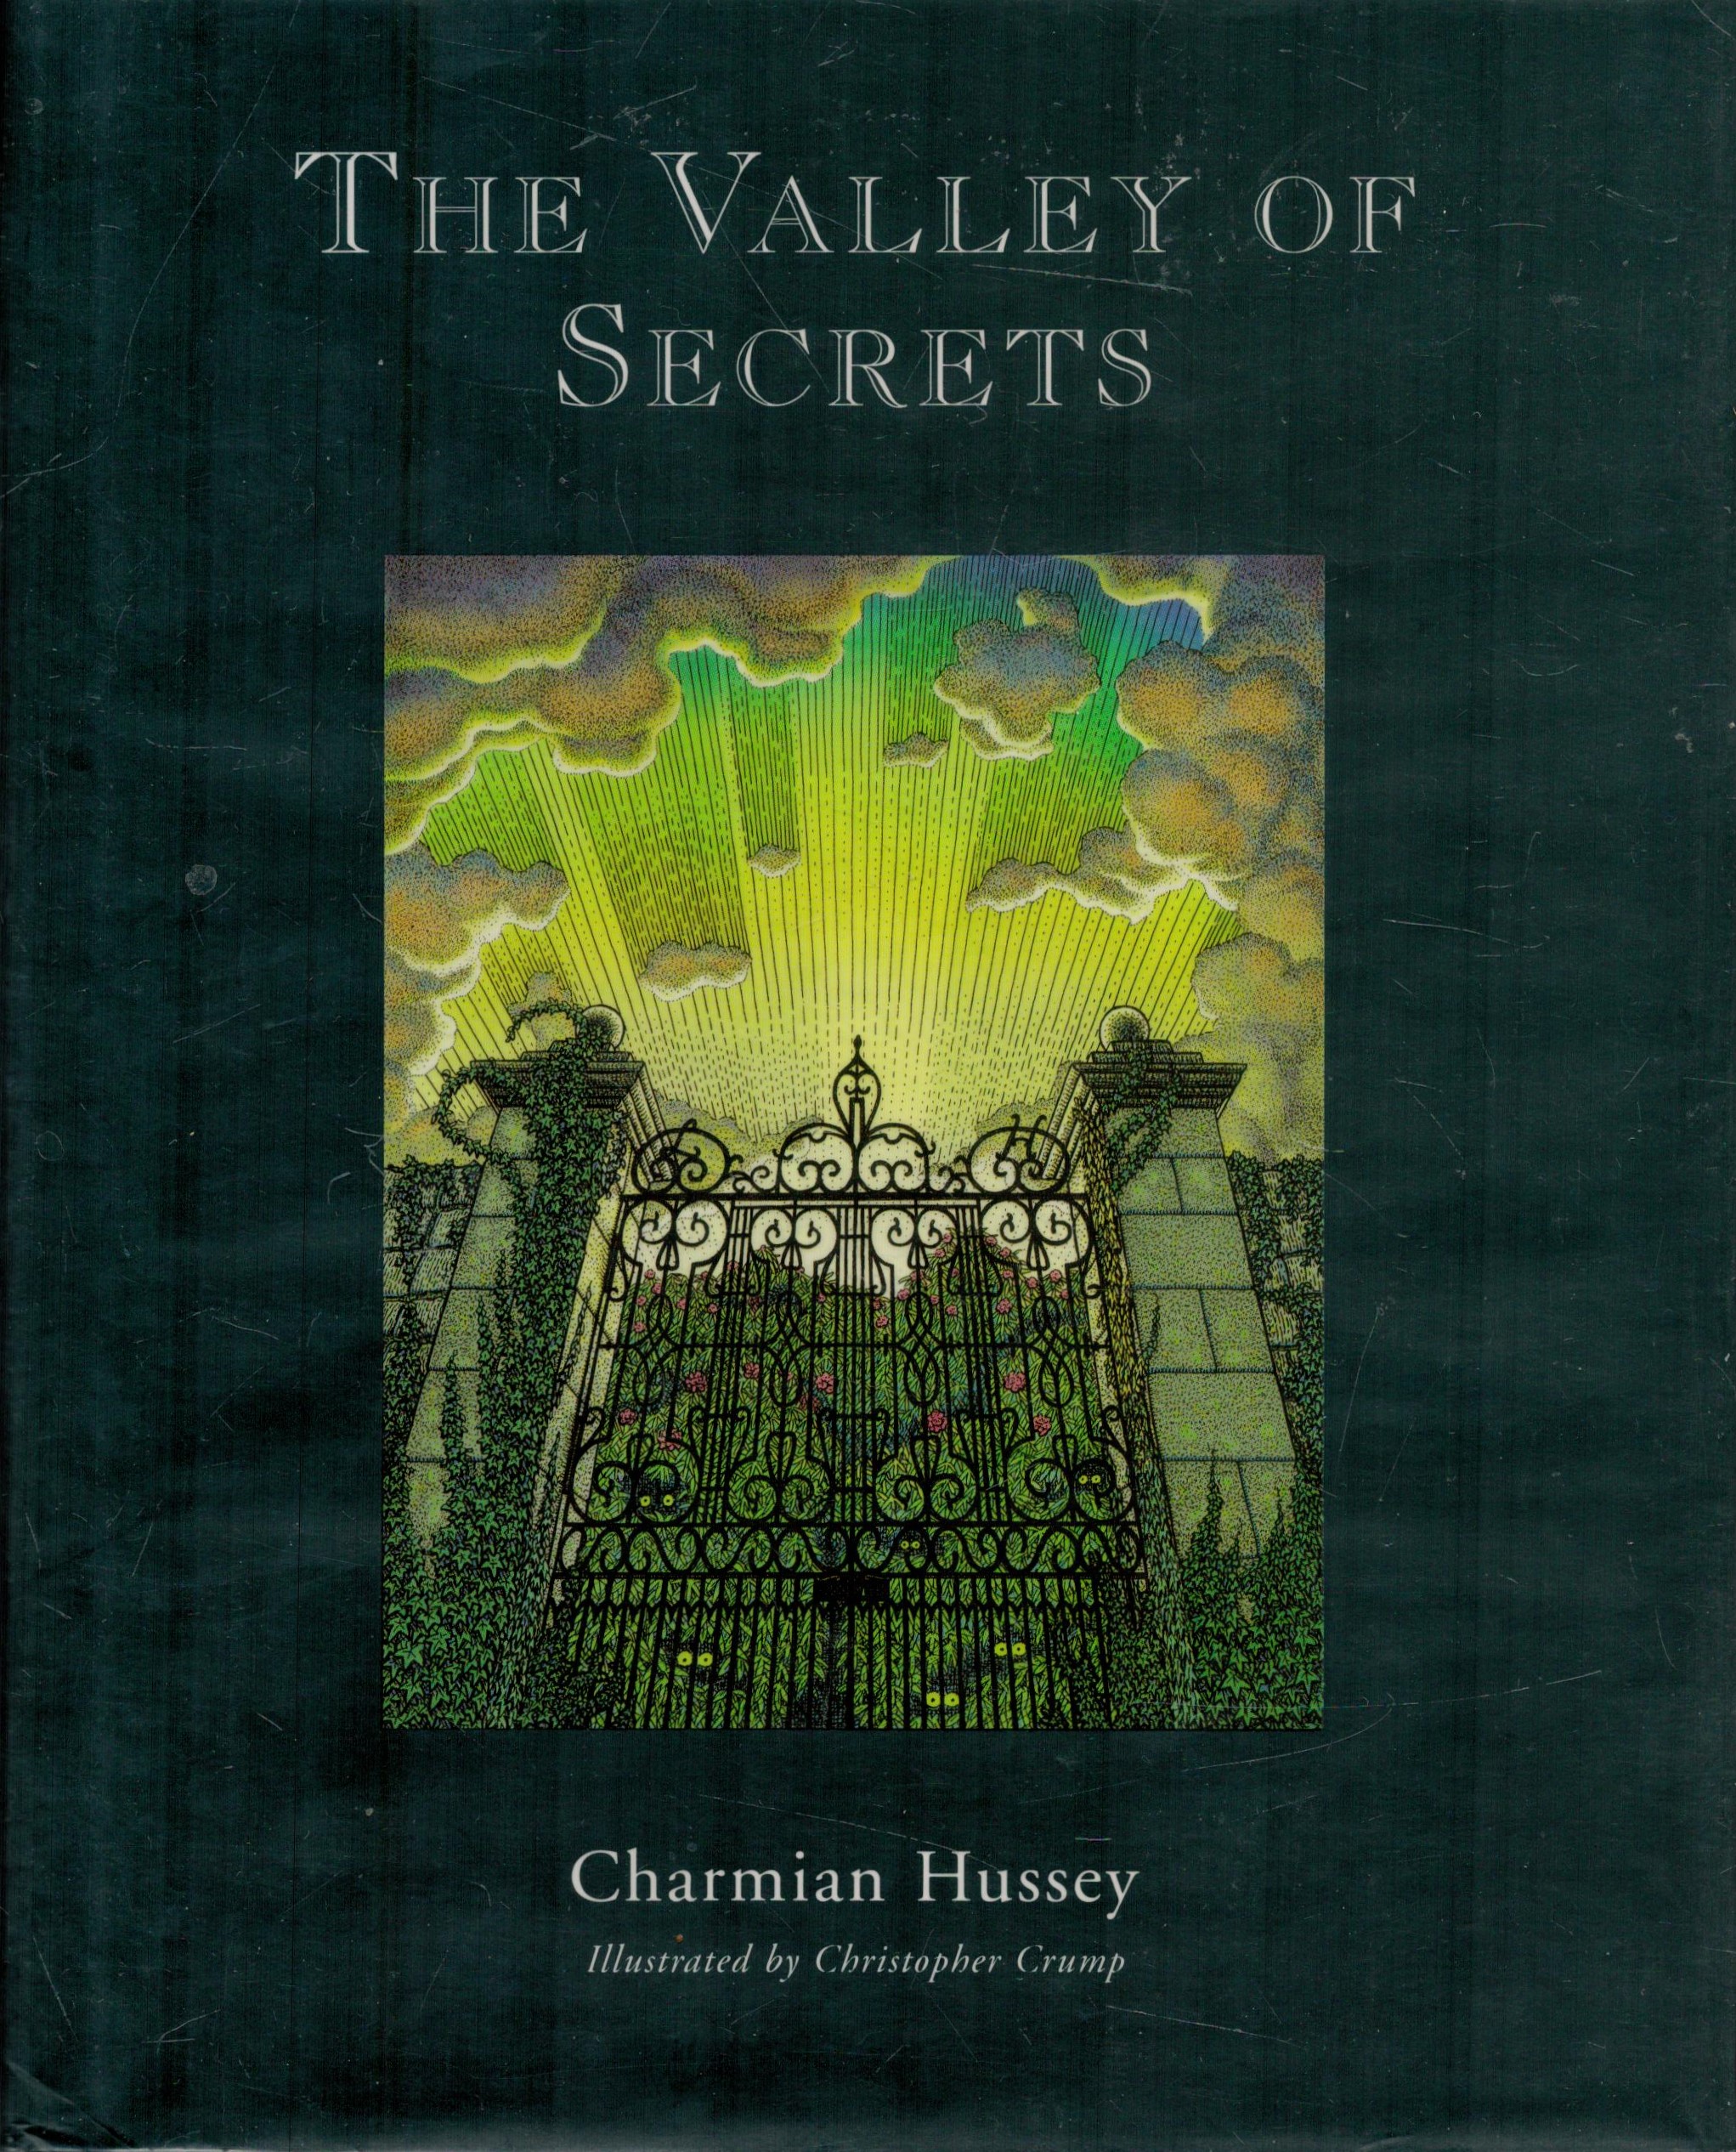 The Valley of Secrets by Charmain Hussey signed by author and illustrator Christopher Crump,